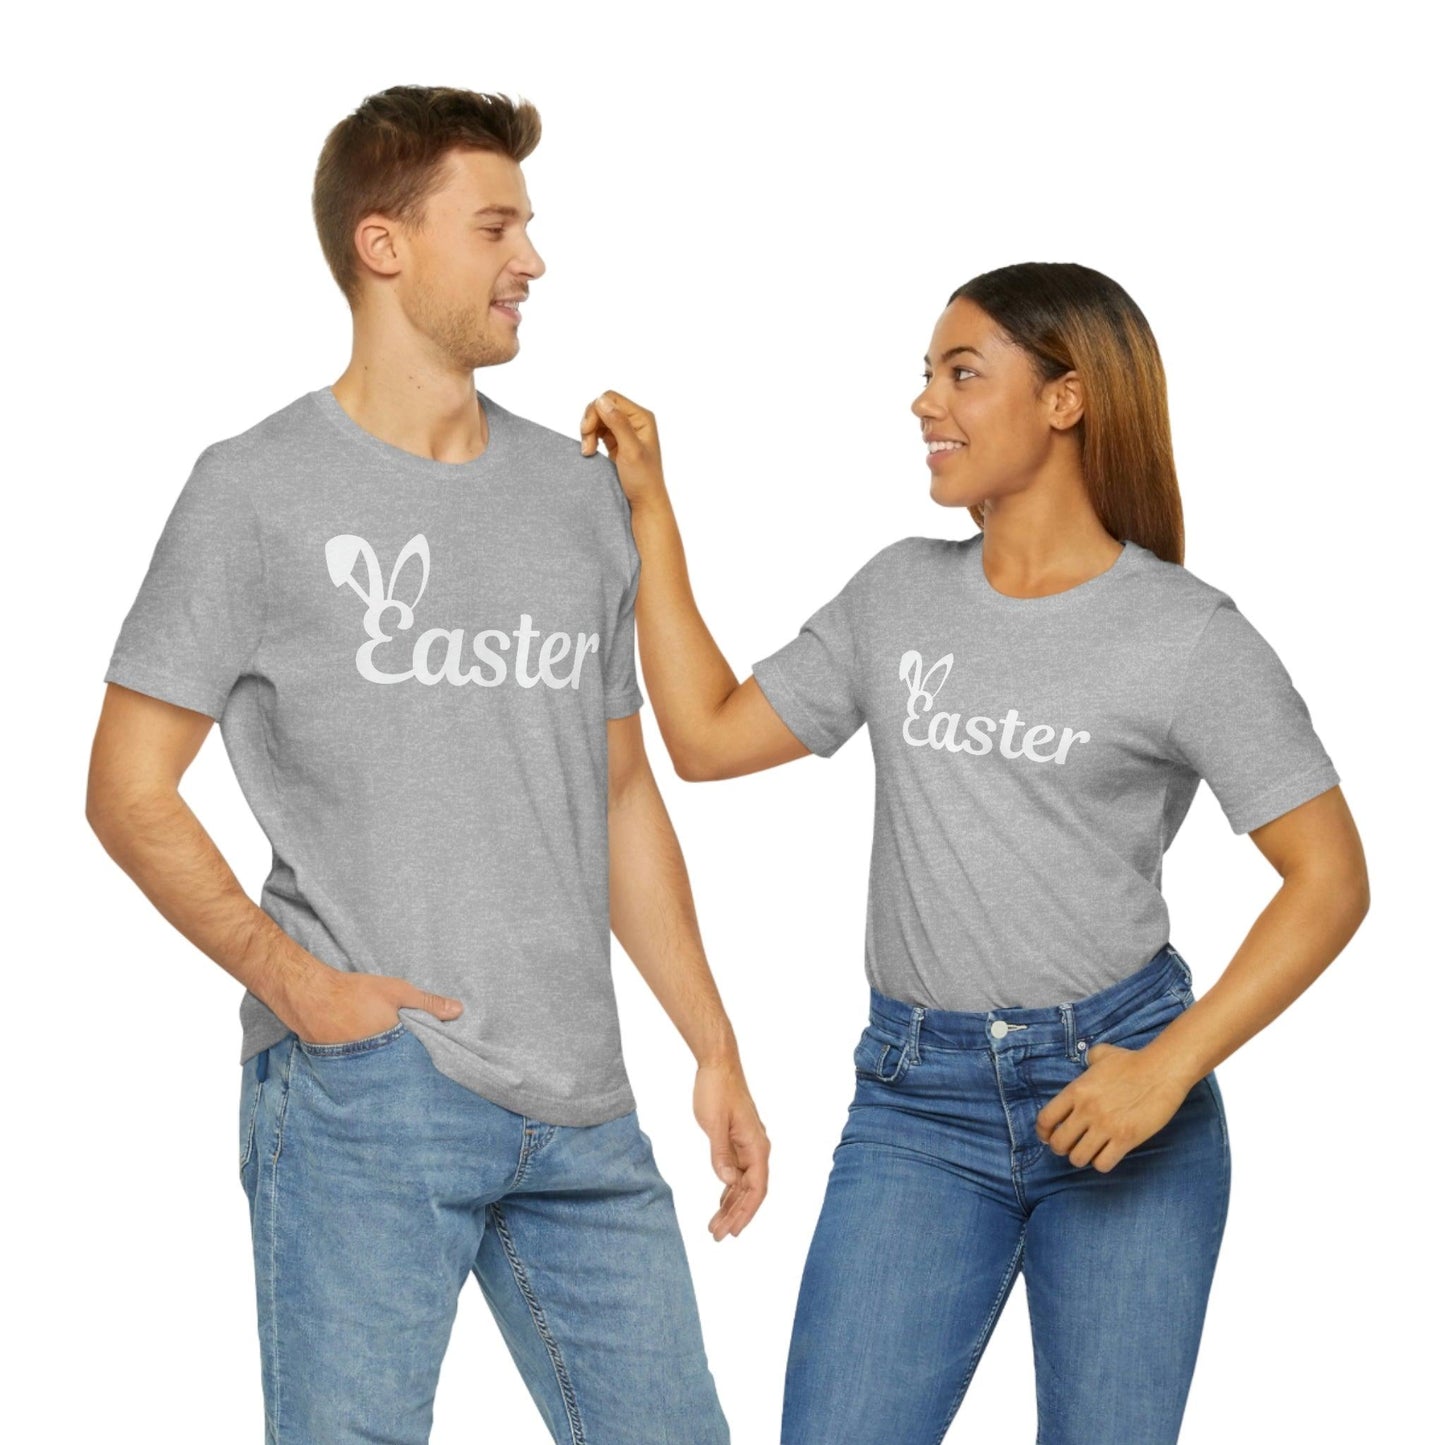 Easter bunny shirt Easter outfit Happy easter shirt Easter tee - Easter egg hunt shirt easter bunny outfit bunny lover gift Easter tshirt - Giftsmojo